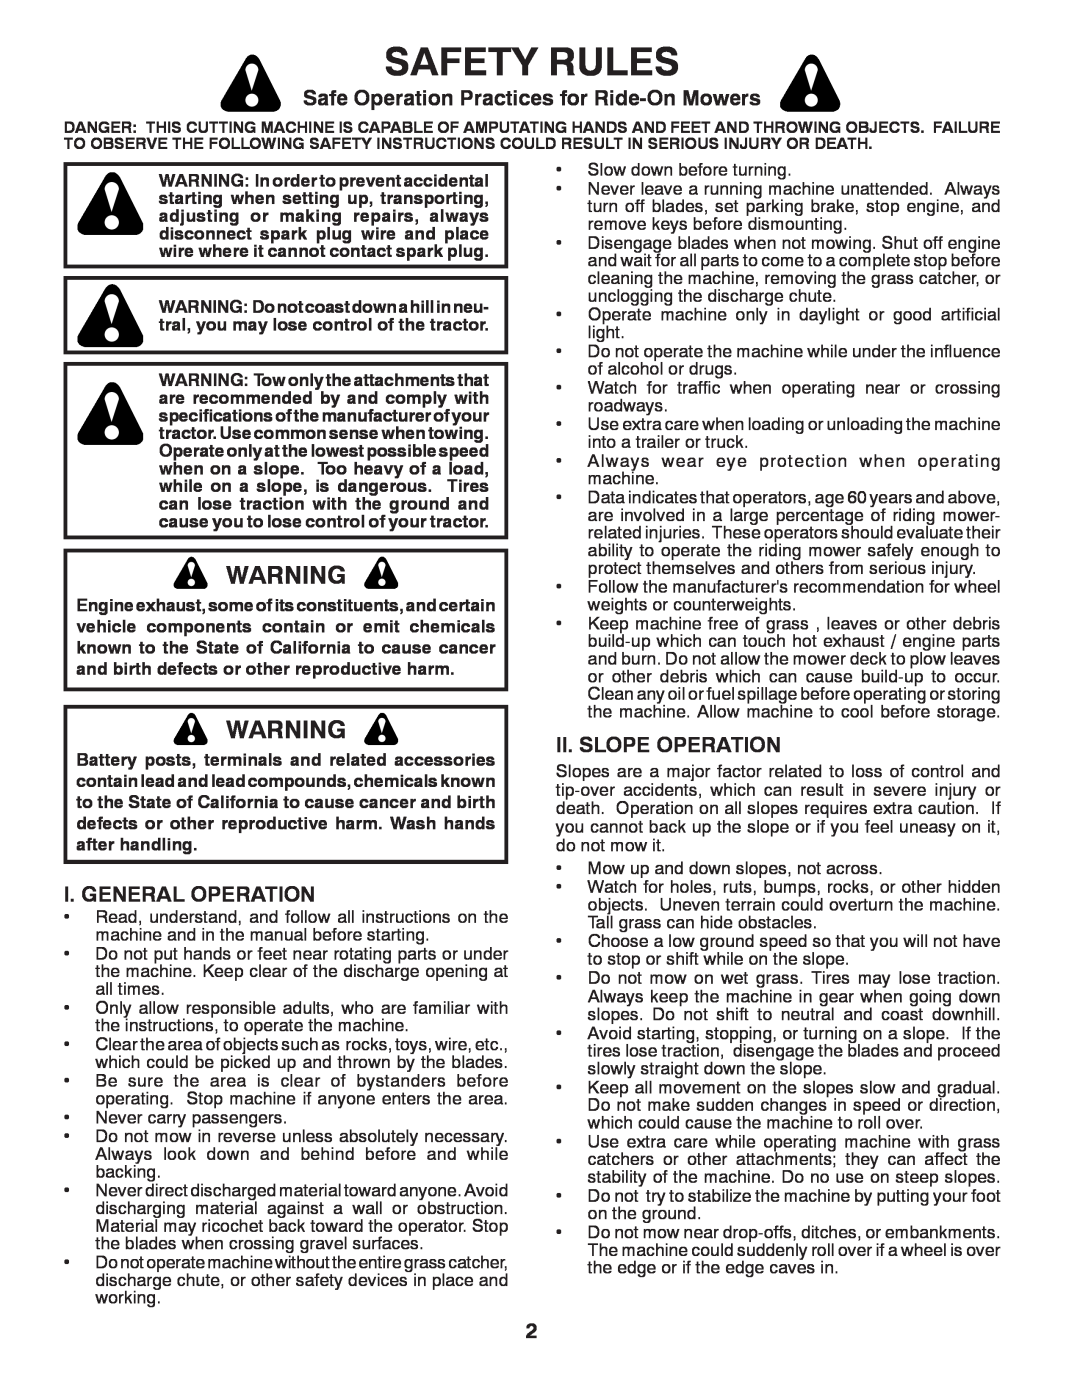 Poulan 438719 manual Safety Rules, Safe Operation Practices for Ride-On Mowers, I. General Operation, Ii. Slope Operation 